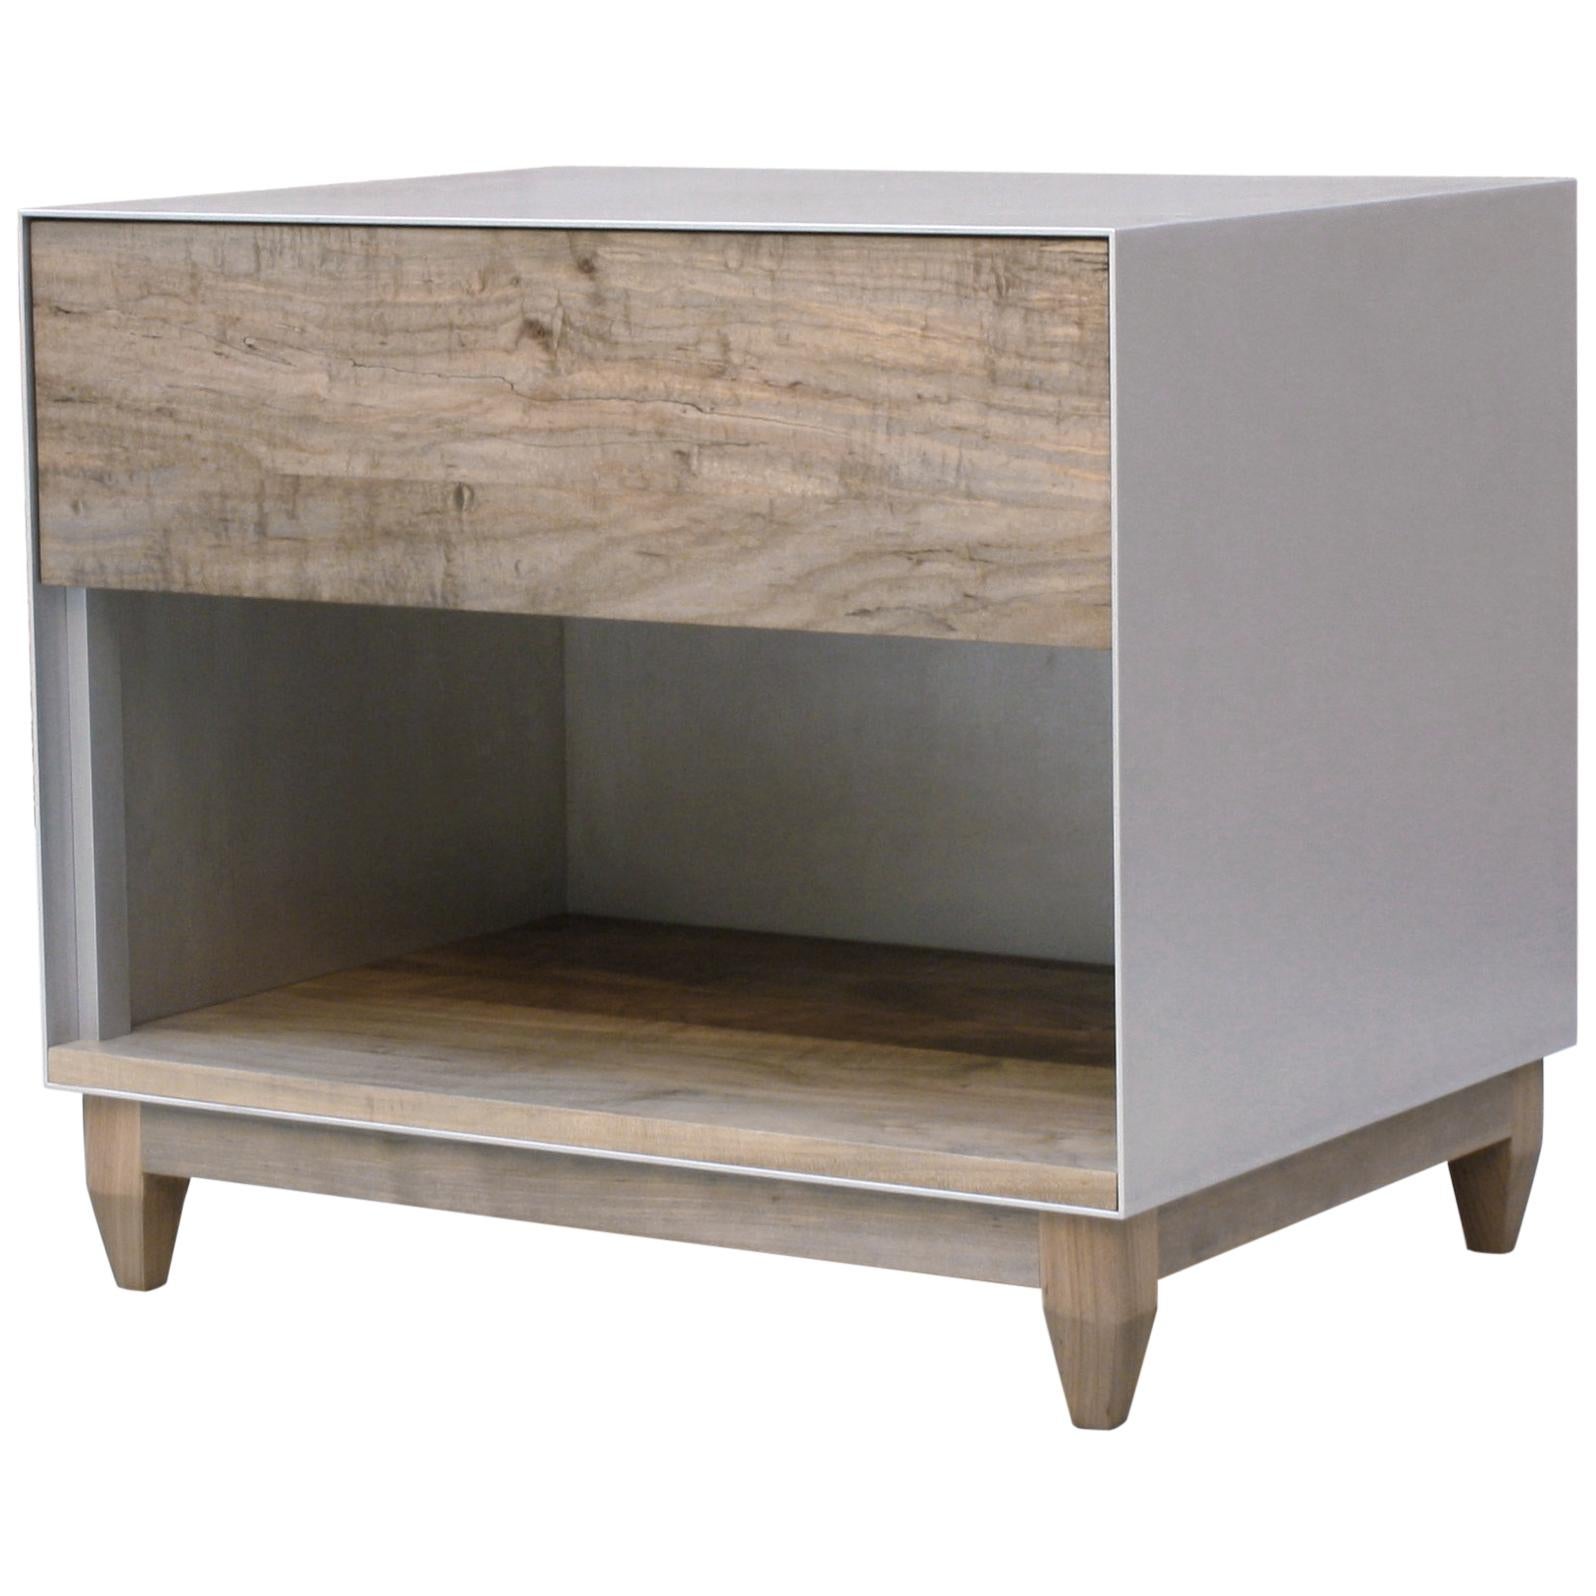 Oxide, Handmade Nightstand or Side Cabinet - Waxed Aluminum and Oxidized Maple im Angebot